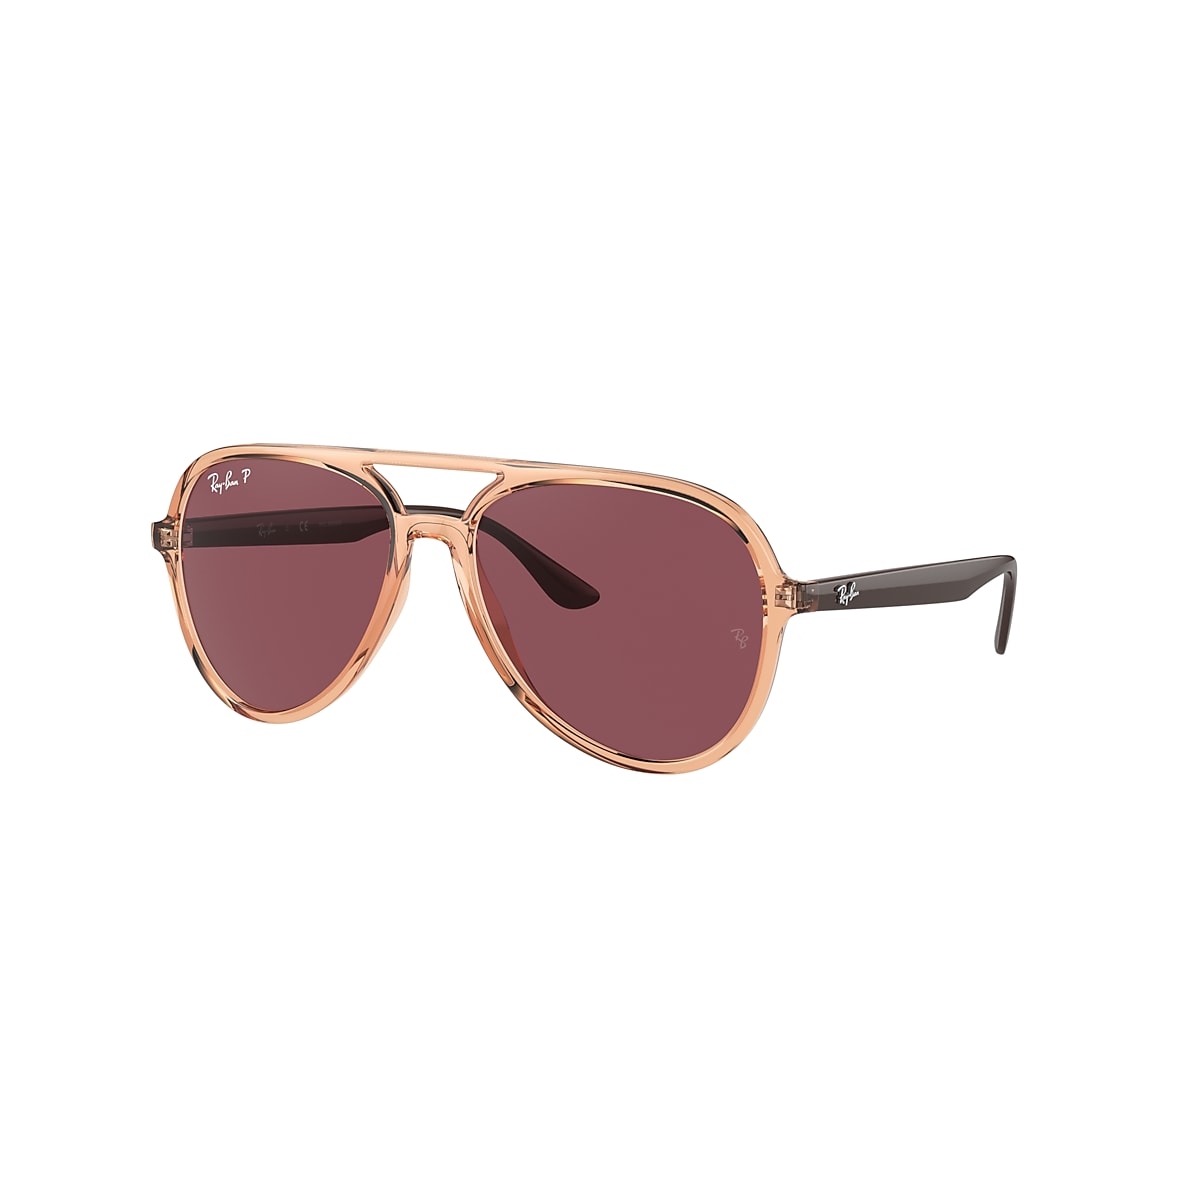 RB4376 Sunglasses in Transparent Brown and Violet - RB4376F | Ray 